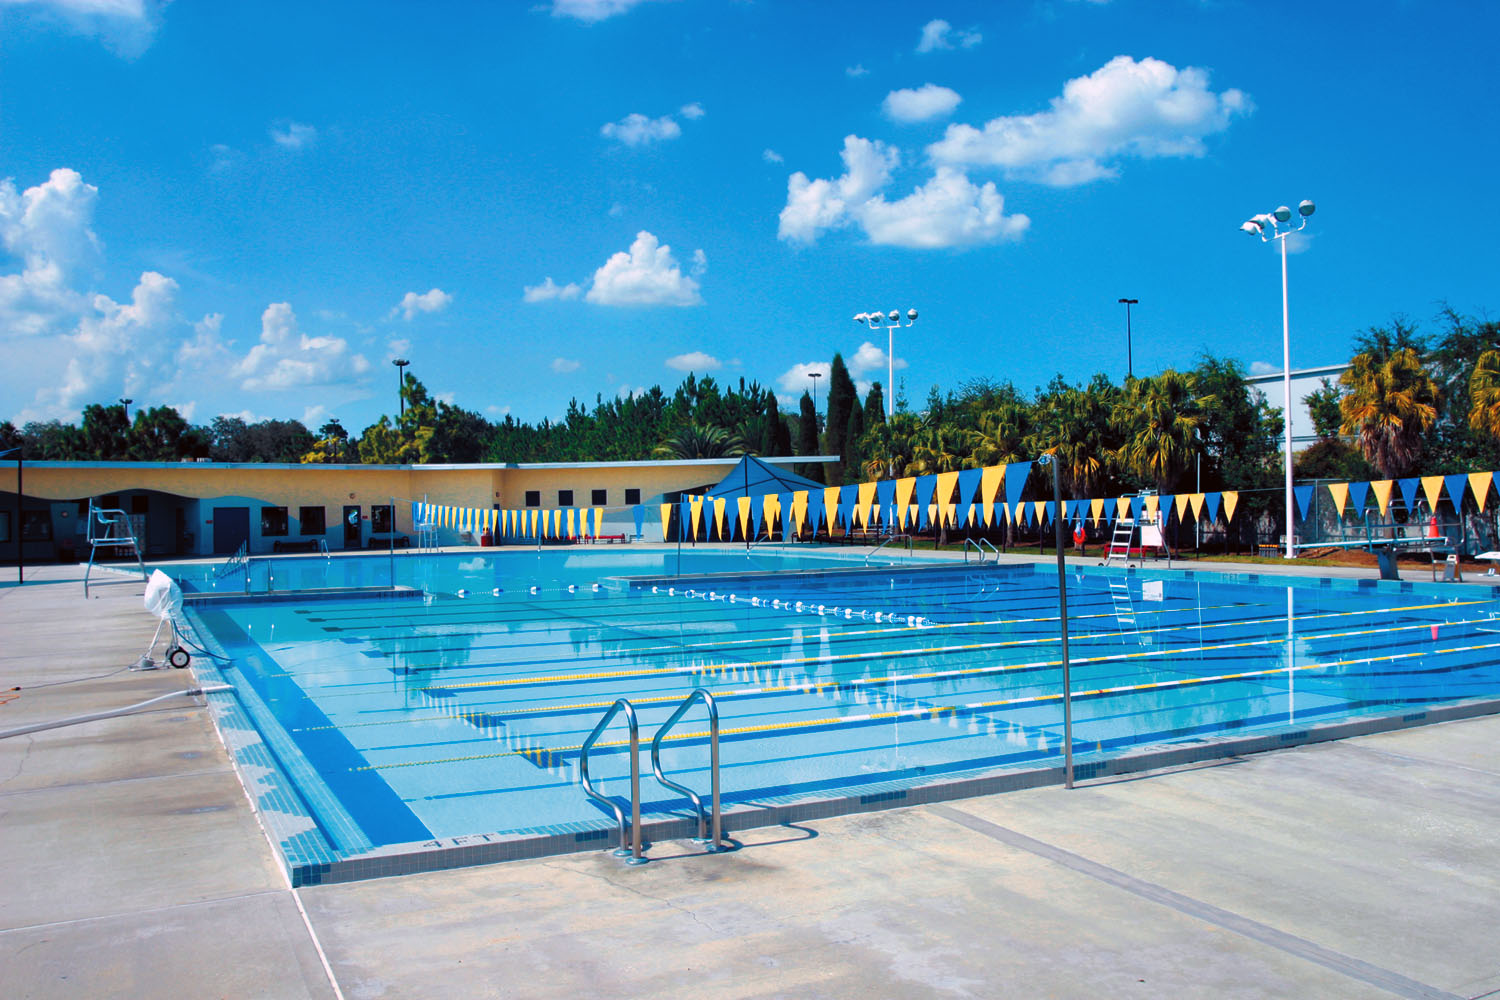 The pool at the Kelly Recreation Center in Lakeland